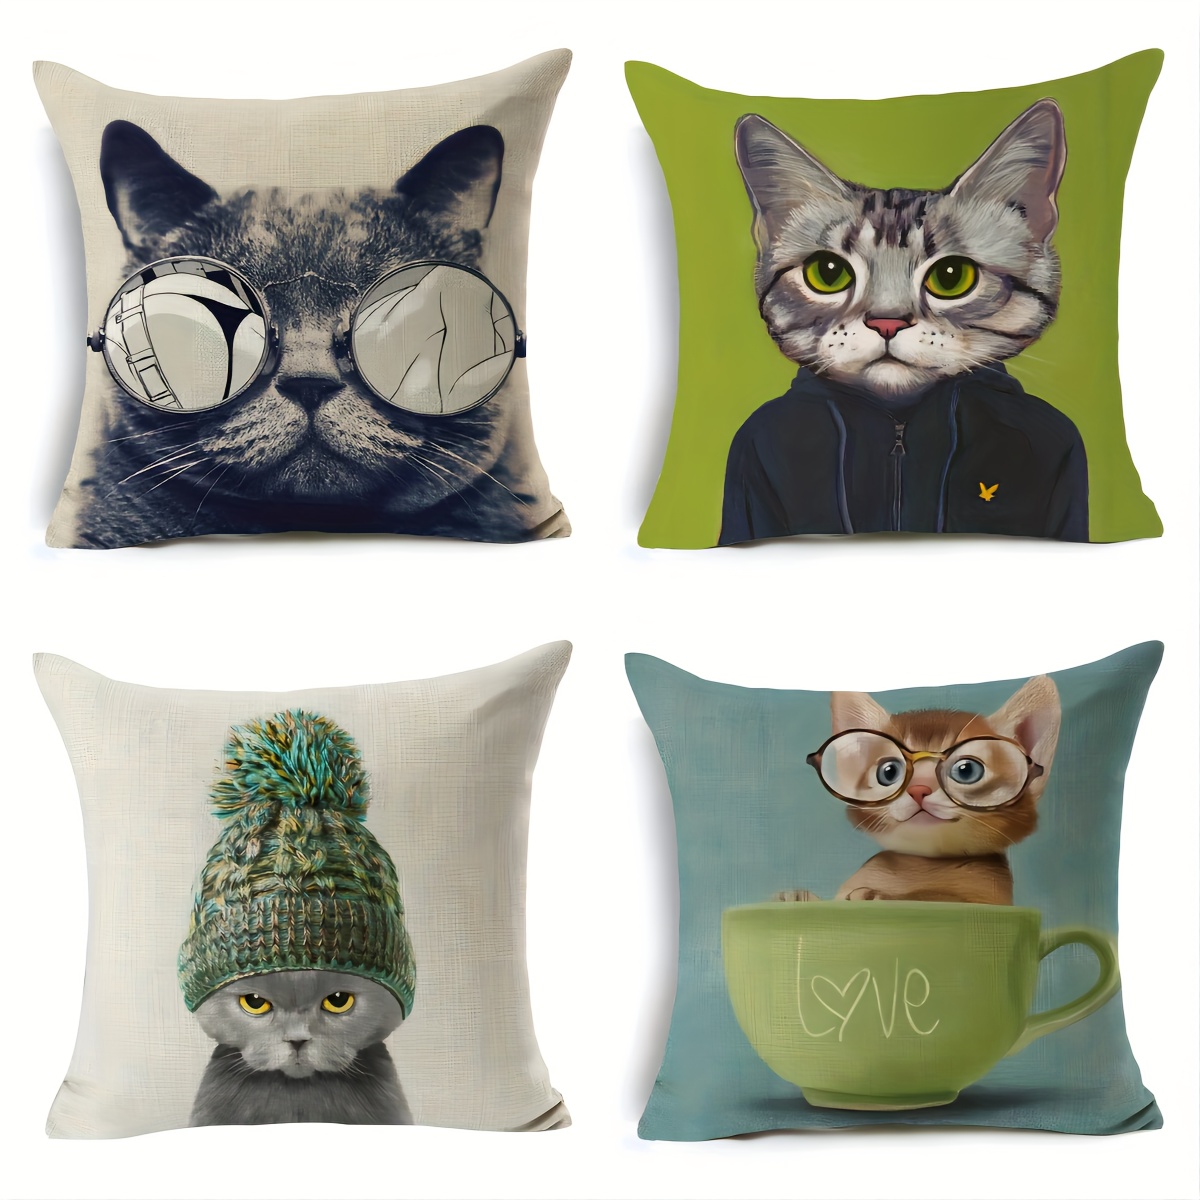 

Contemporary 4-piece Cartoon Cat Throw Pillow Covers Set, 18x18 Inch, Polyester, Zipper Closure, Machine Washable For Living Room Decor – Cute Feline Illustration Non-woven Fabric Pillowcases